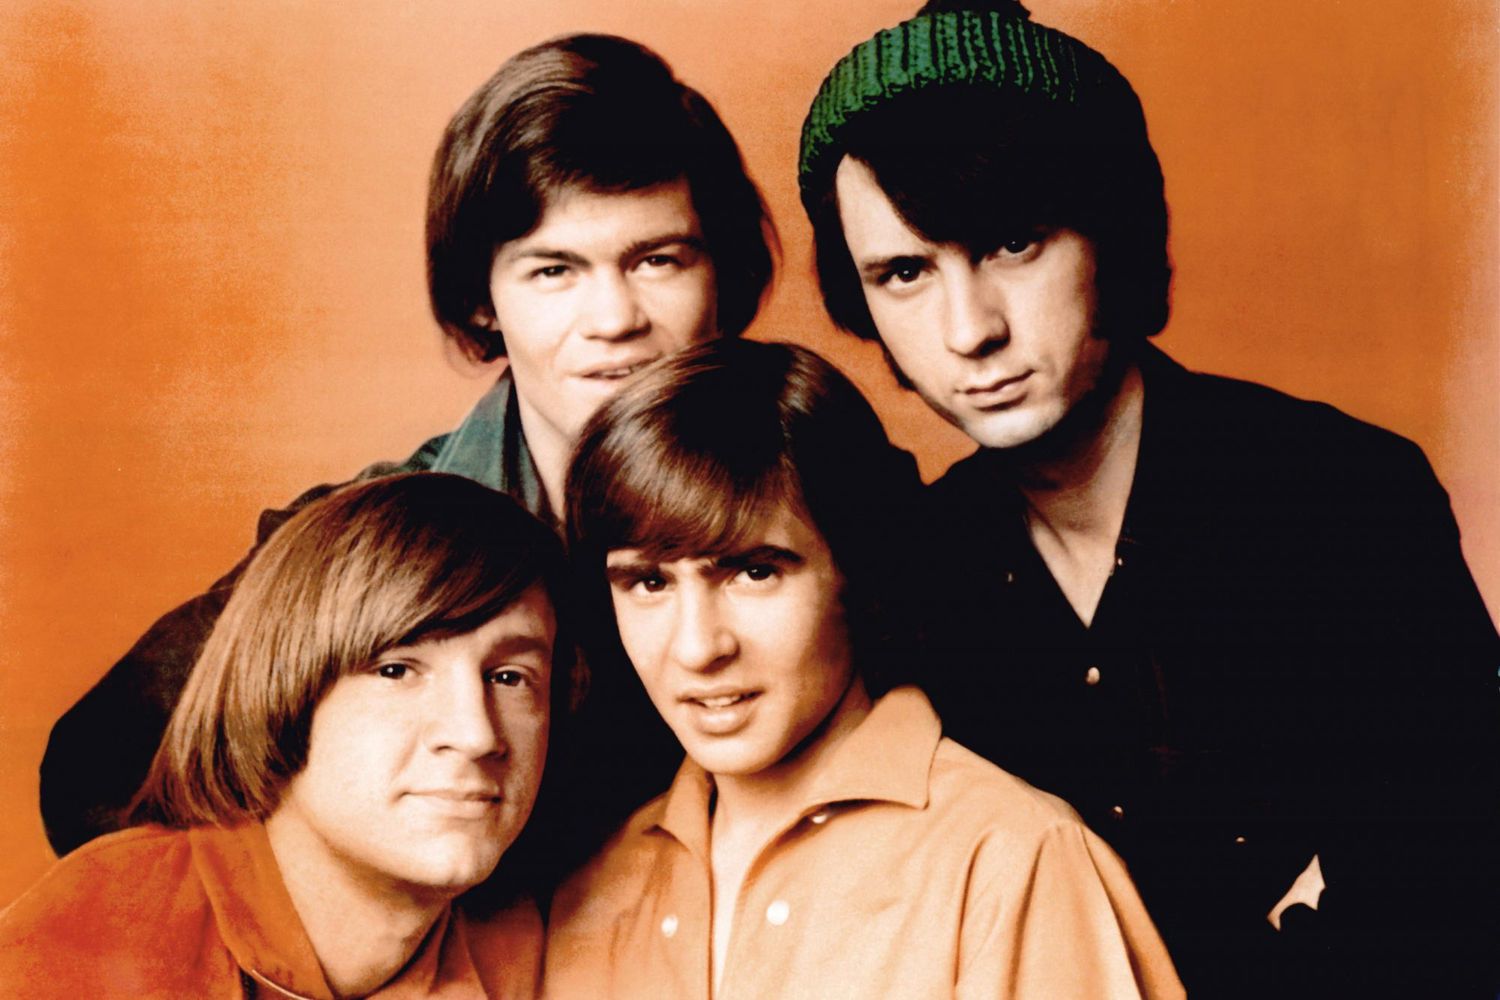 Peter Tork, Mickey Dolenz, Davy Jones, and Michael Nesmith of the Monkees